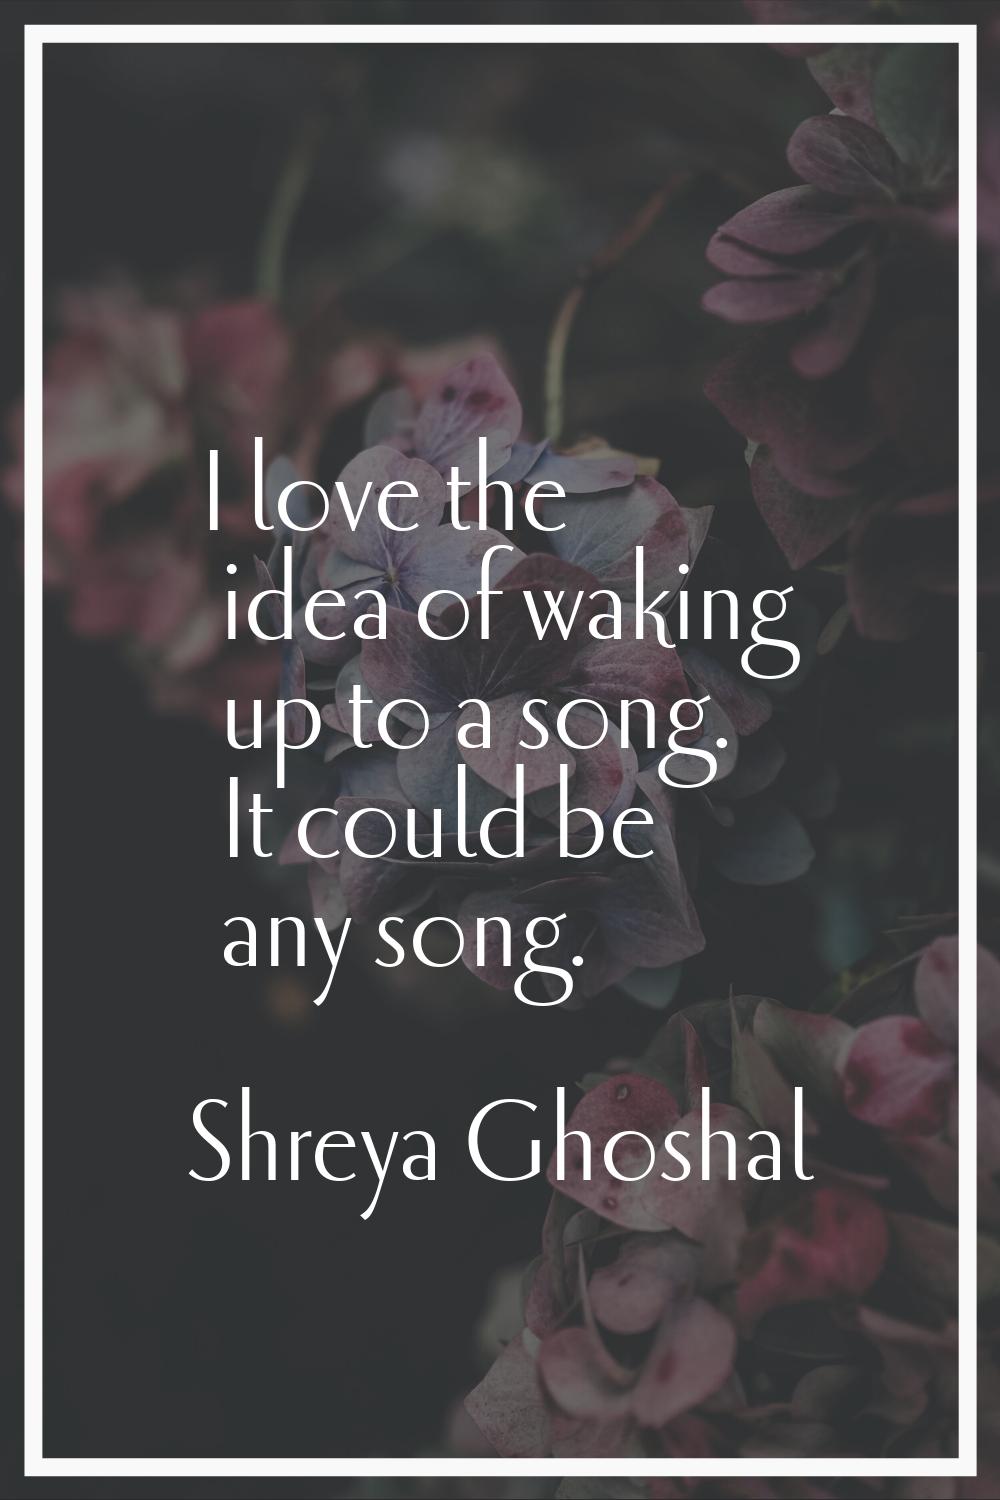 I love the idea of waking up to a song. It could be any song.